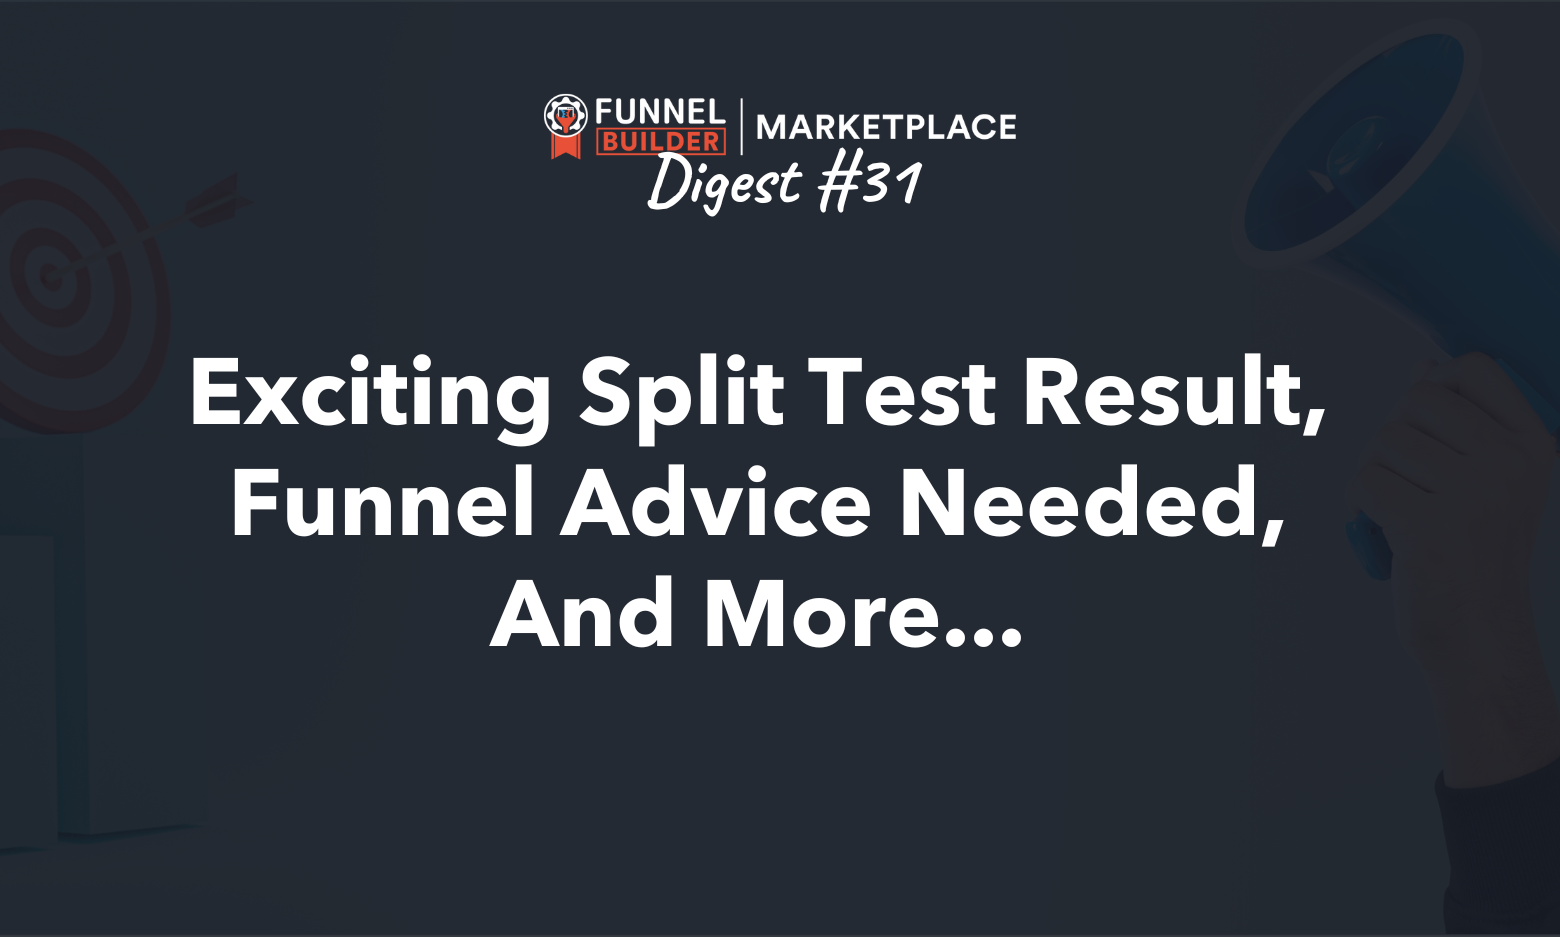 FBM Digest #31: Exciting split test result, funnel advice needed, and more...